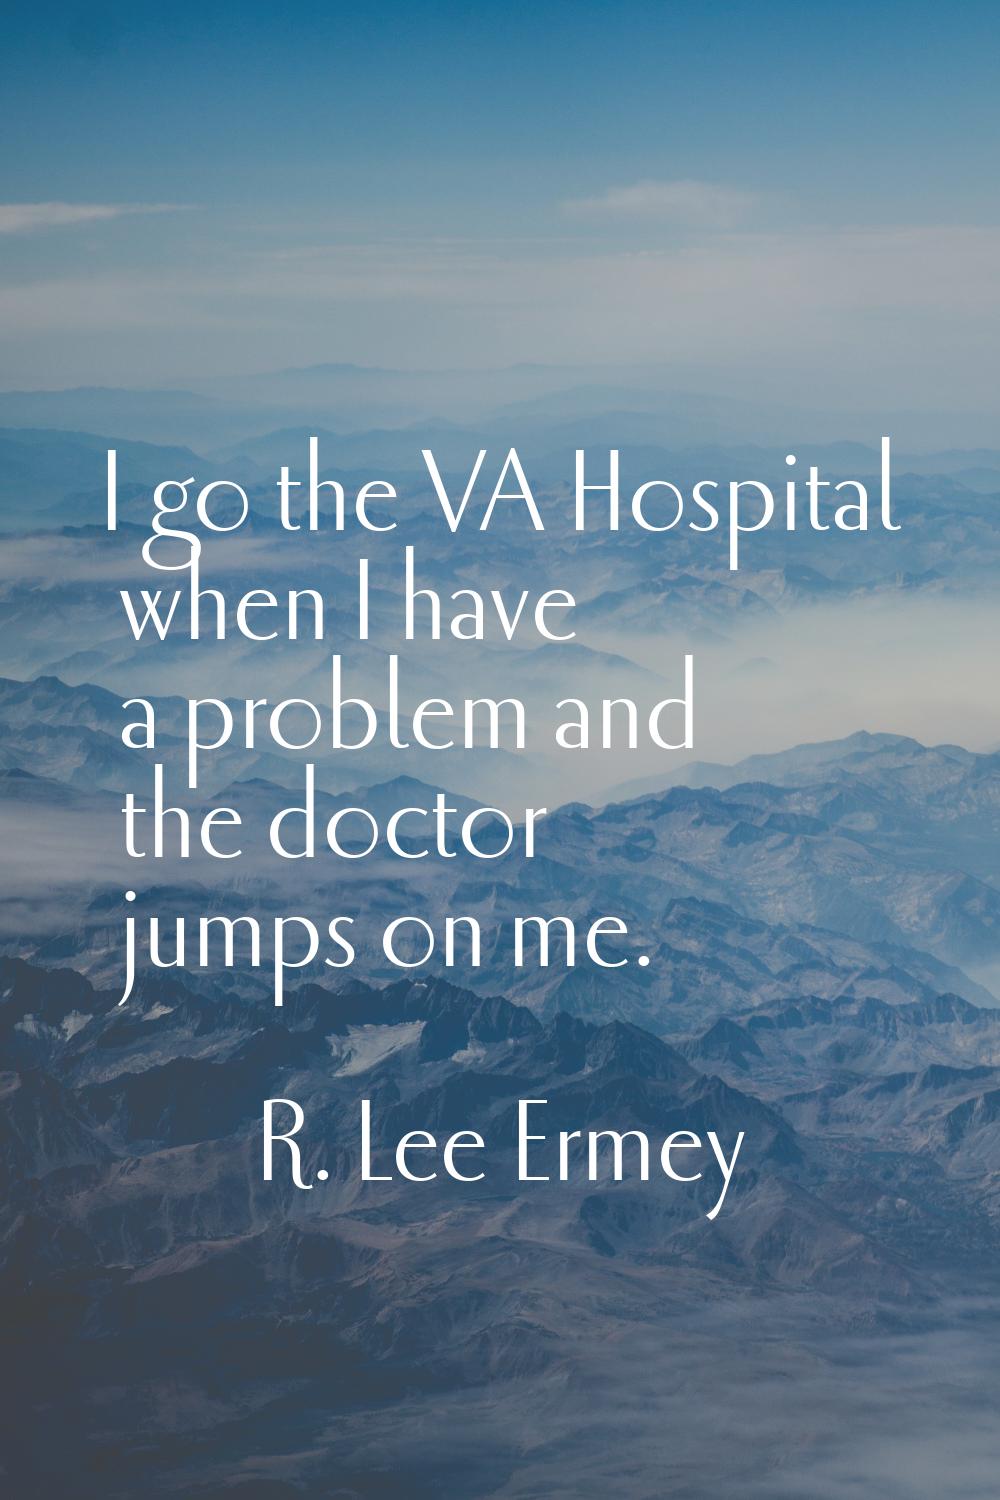 I go the VA Hospital when I have a problem and the doctor jumps on me.